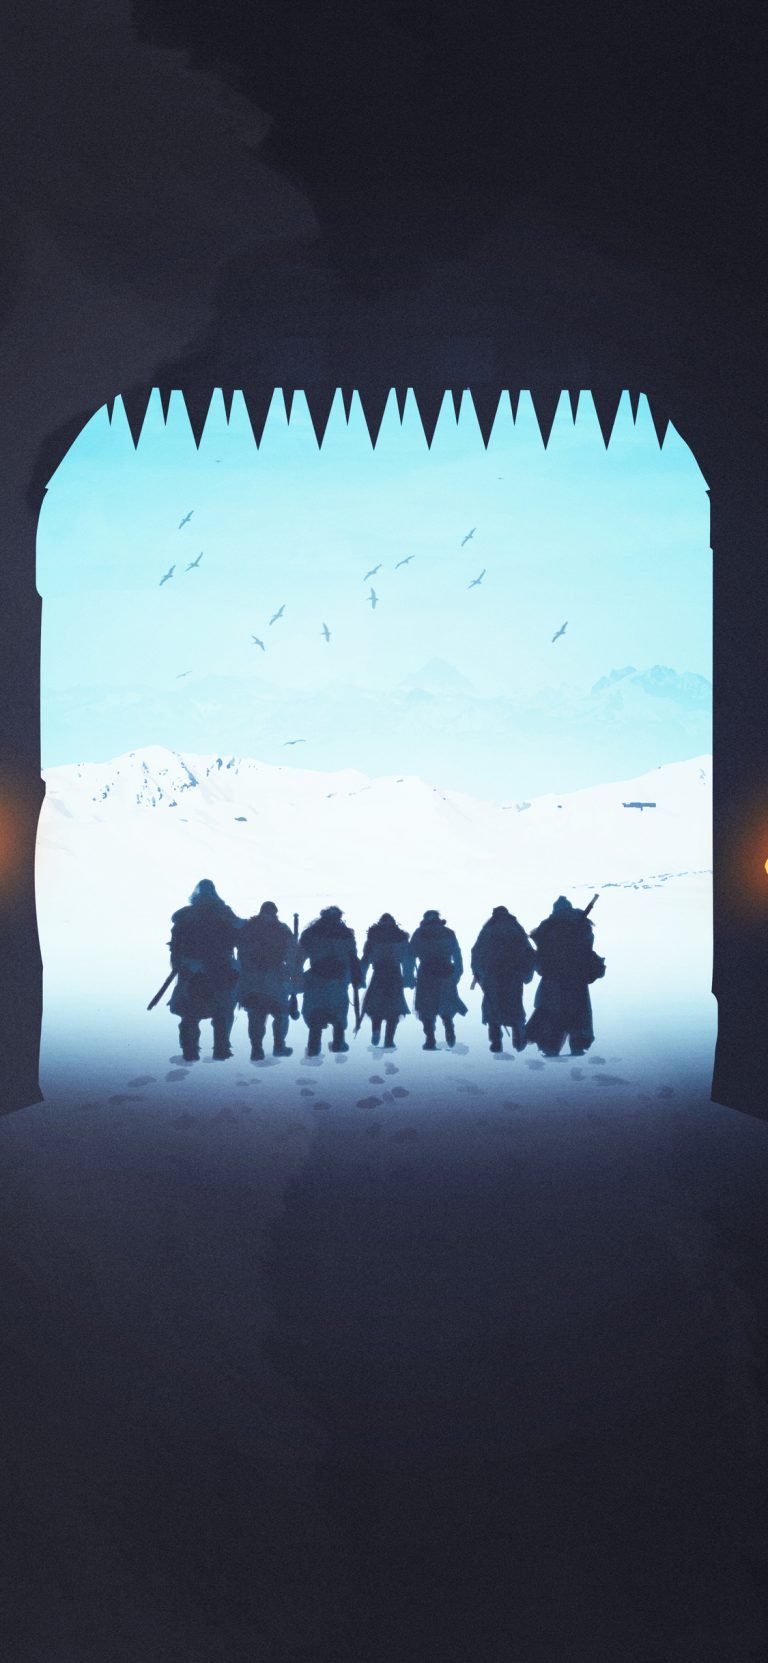 Game Of Thrones Night Watch The Wall IPhone Game Of Thrones Wallpaperk Wallpaper Iphone, IPhone Wallpaper, IPhone 7 Wallpaper